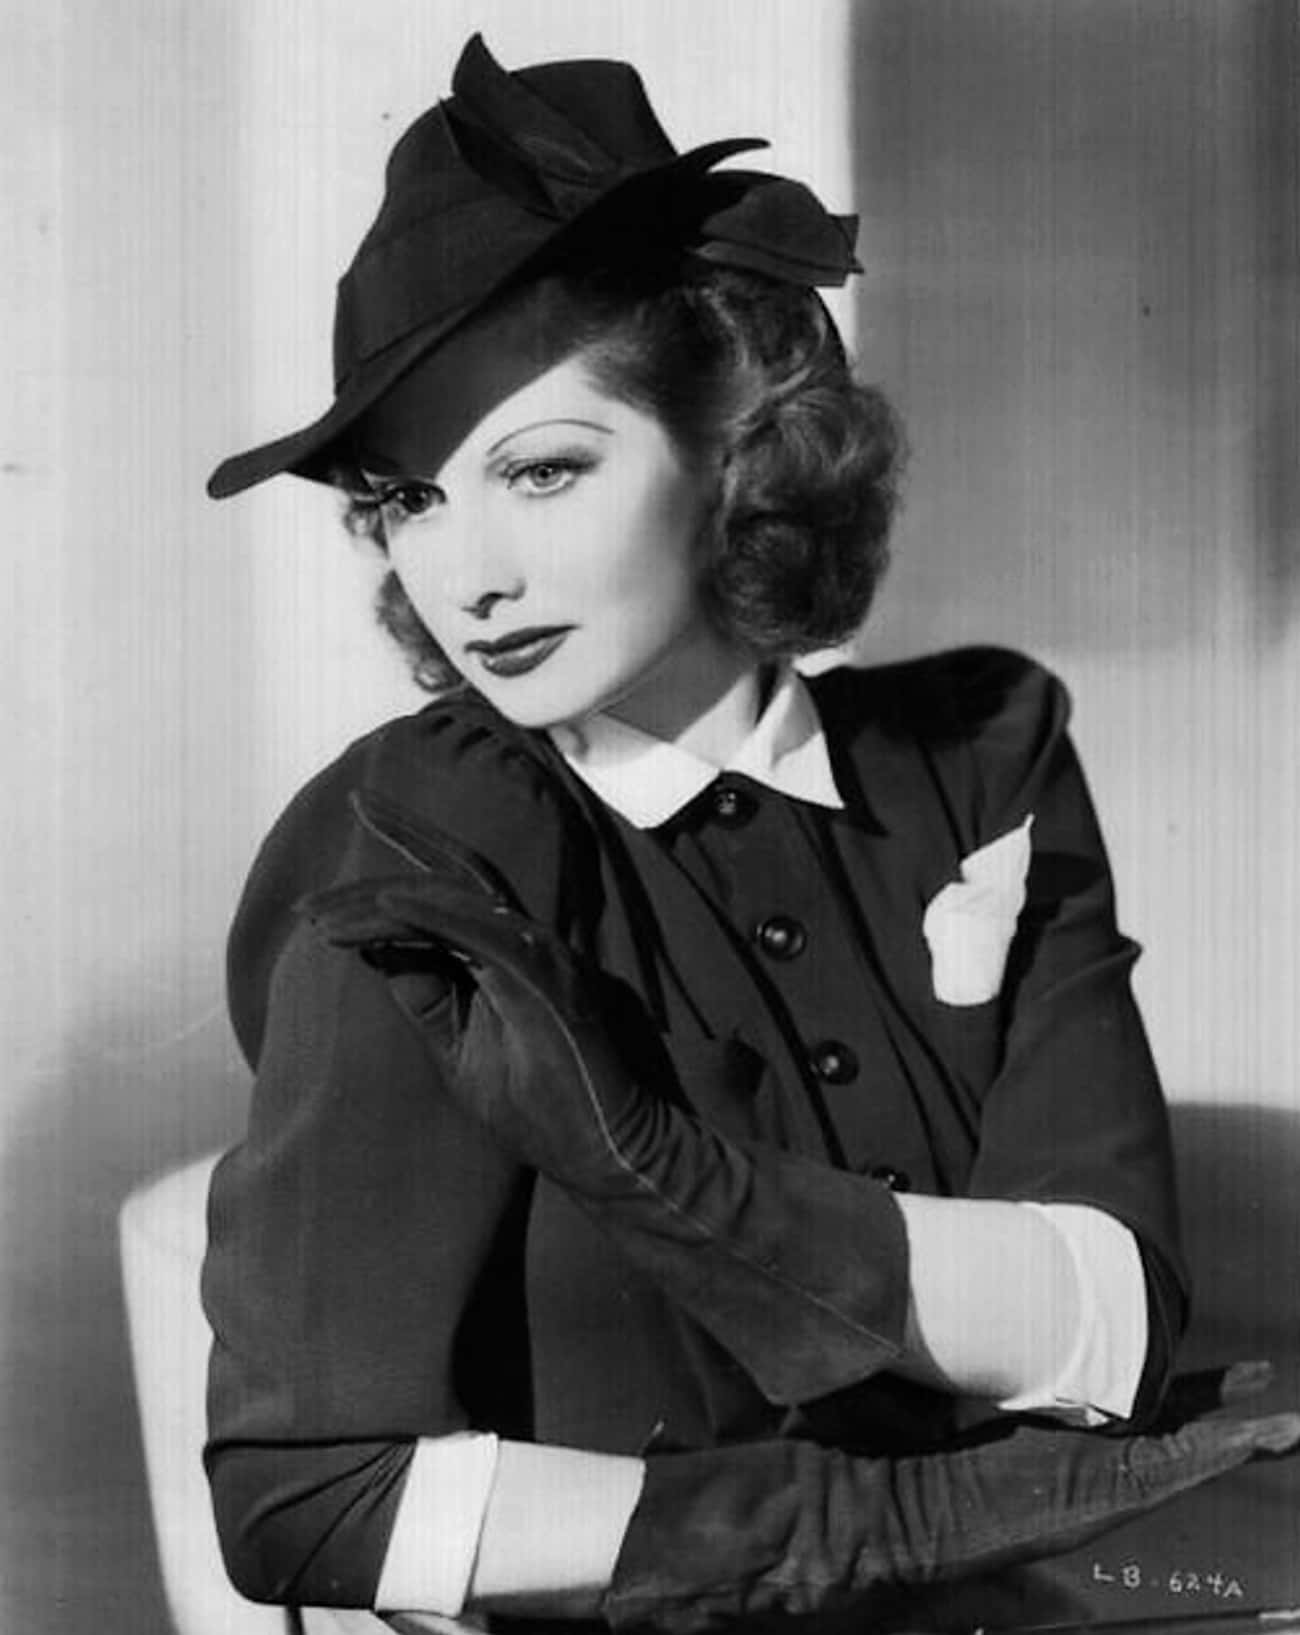 Young Lucille Ball in Black Dress, Black Hat and Black Gloves